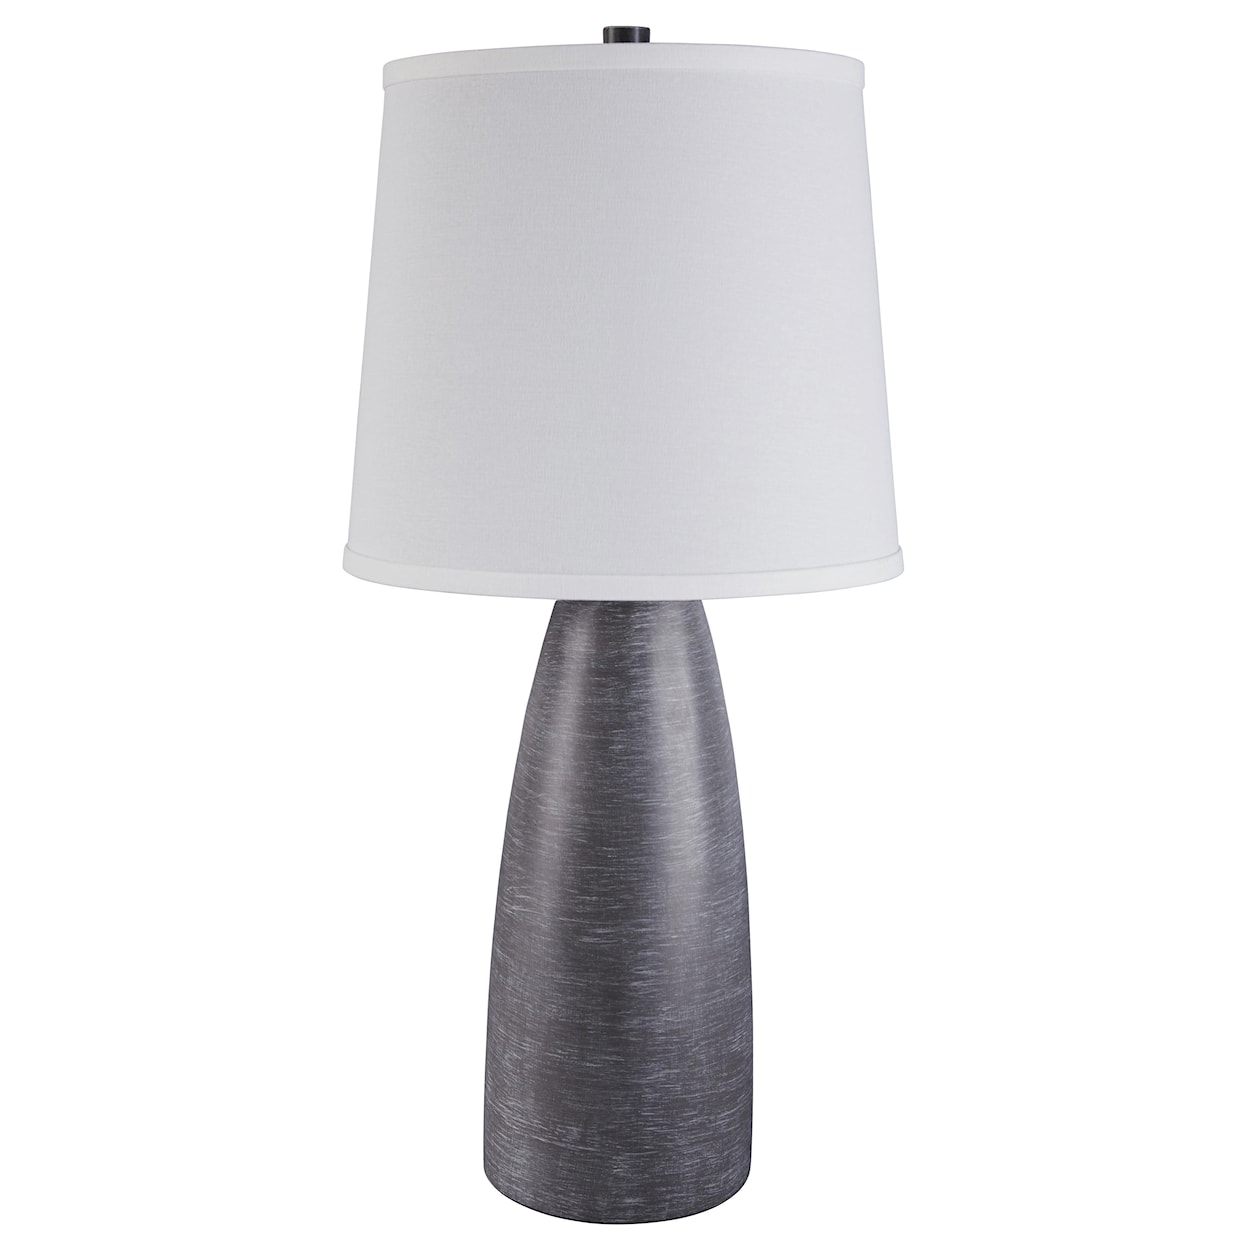 Signature Design By Ashley Lamps Contemporary Ashl L243004 Set Of 2 Shavontae Poly Table Lamps